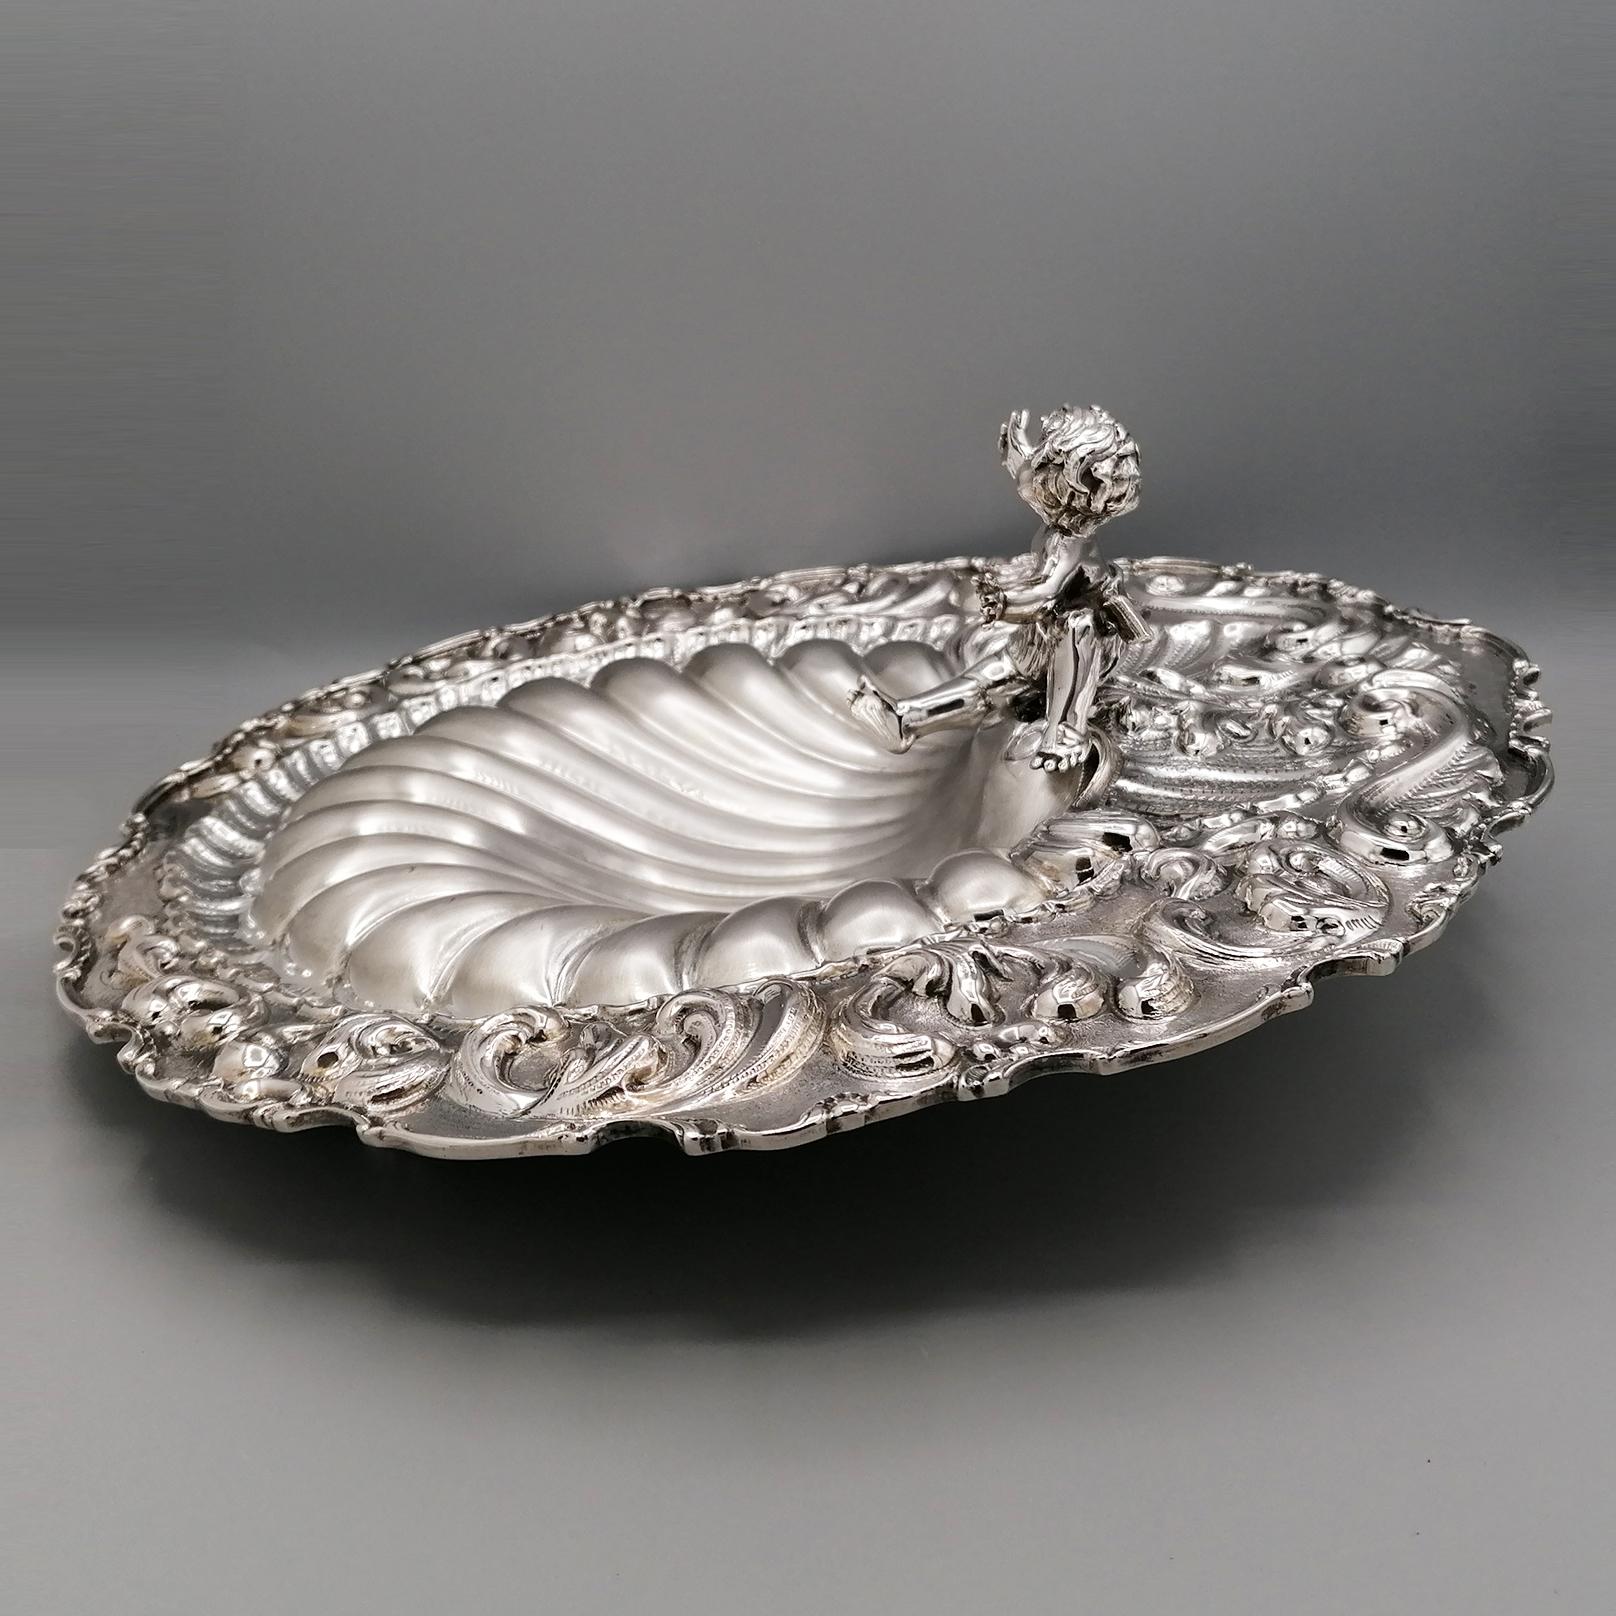 XXI Century Italian Solid Silver 800 Shell Centerpiece with Angel For Sale 1